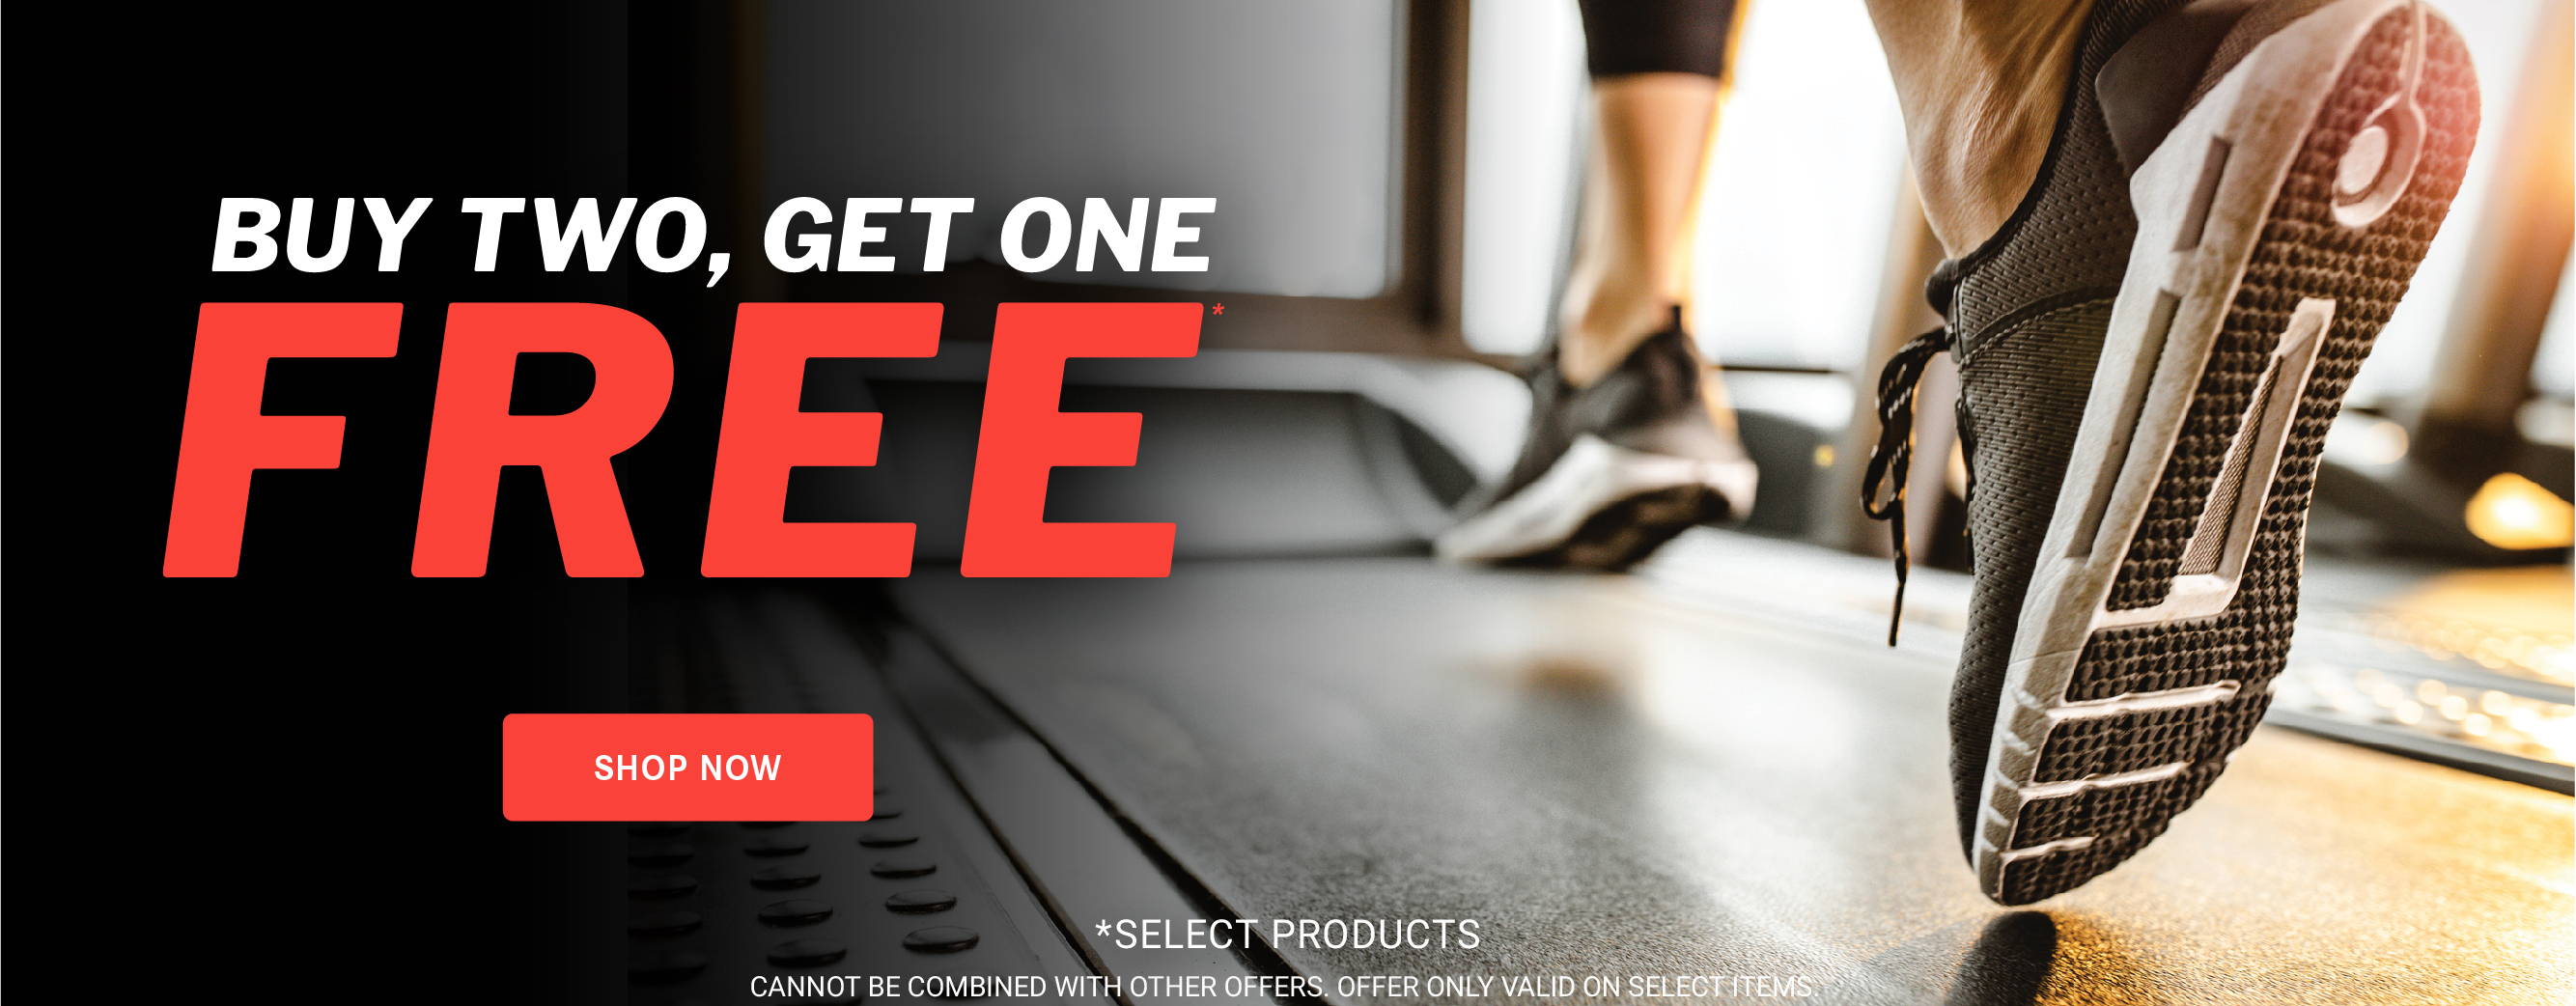 Buy 2, Get 1 FREE Select Products